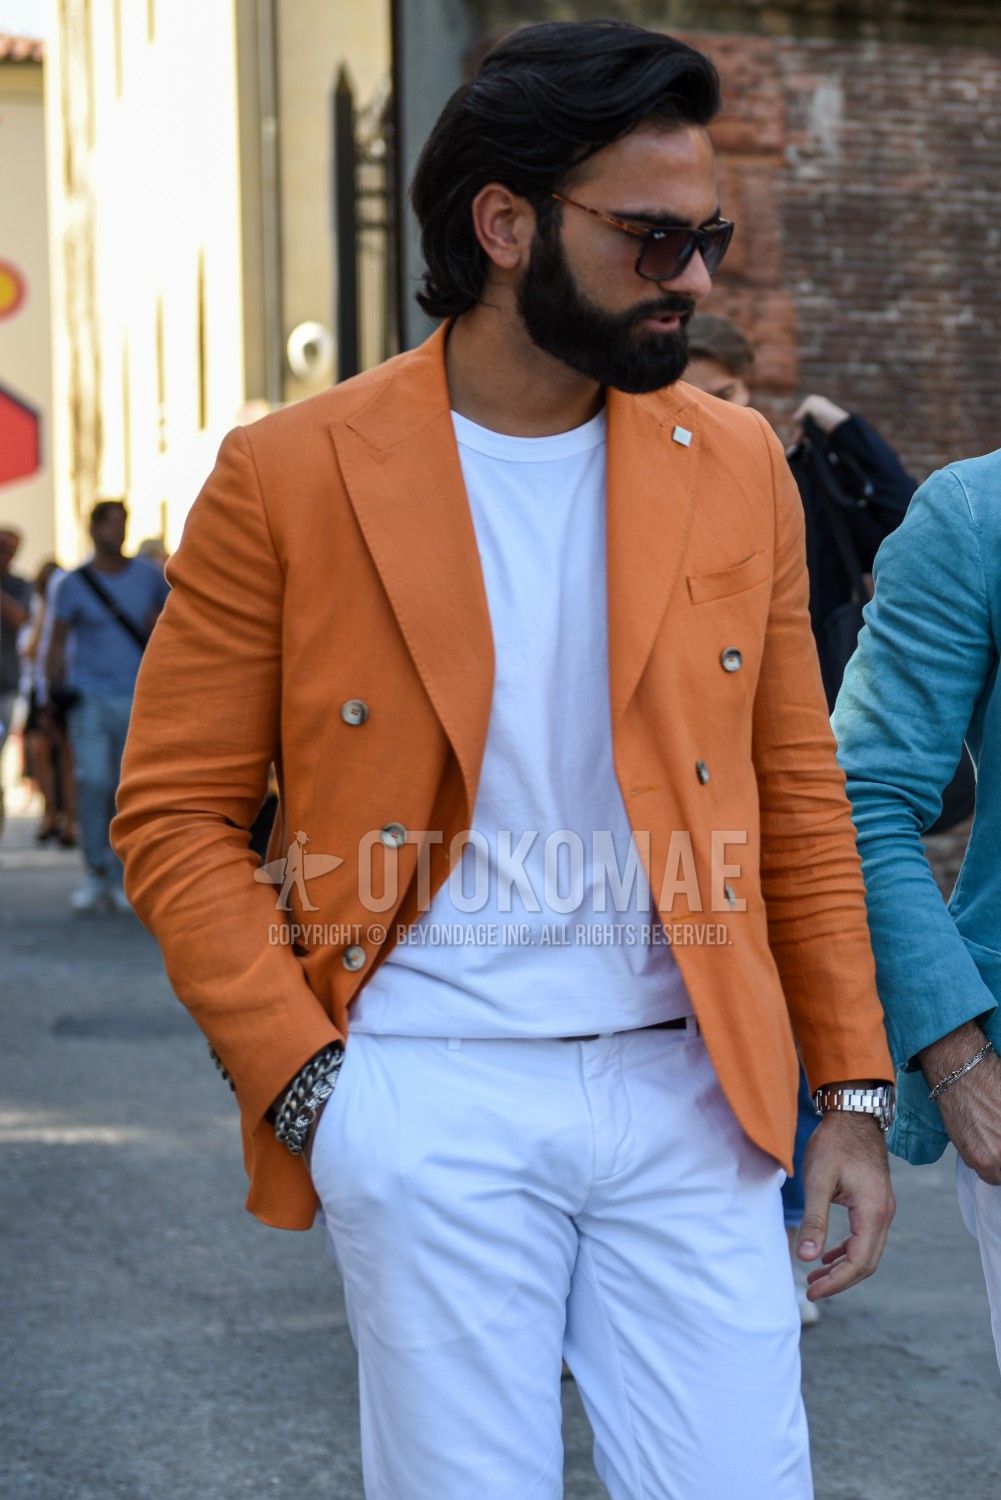 Five ways to wear white pants to make men's summer outfits more